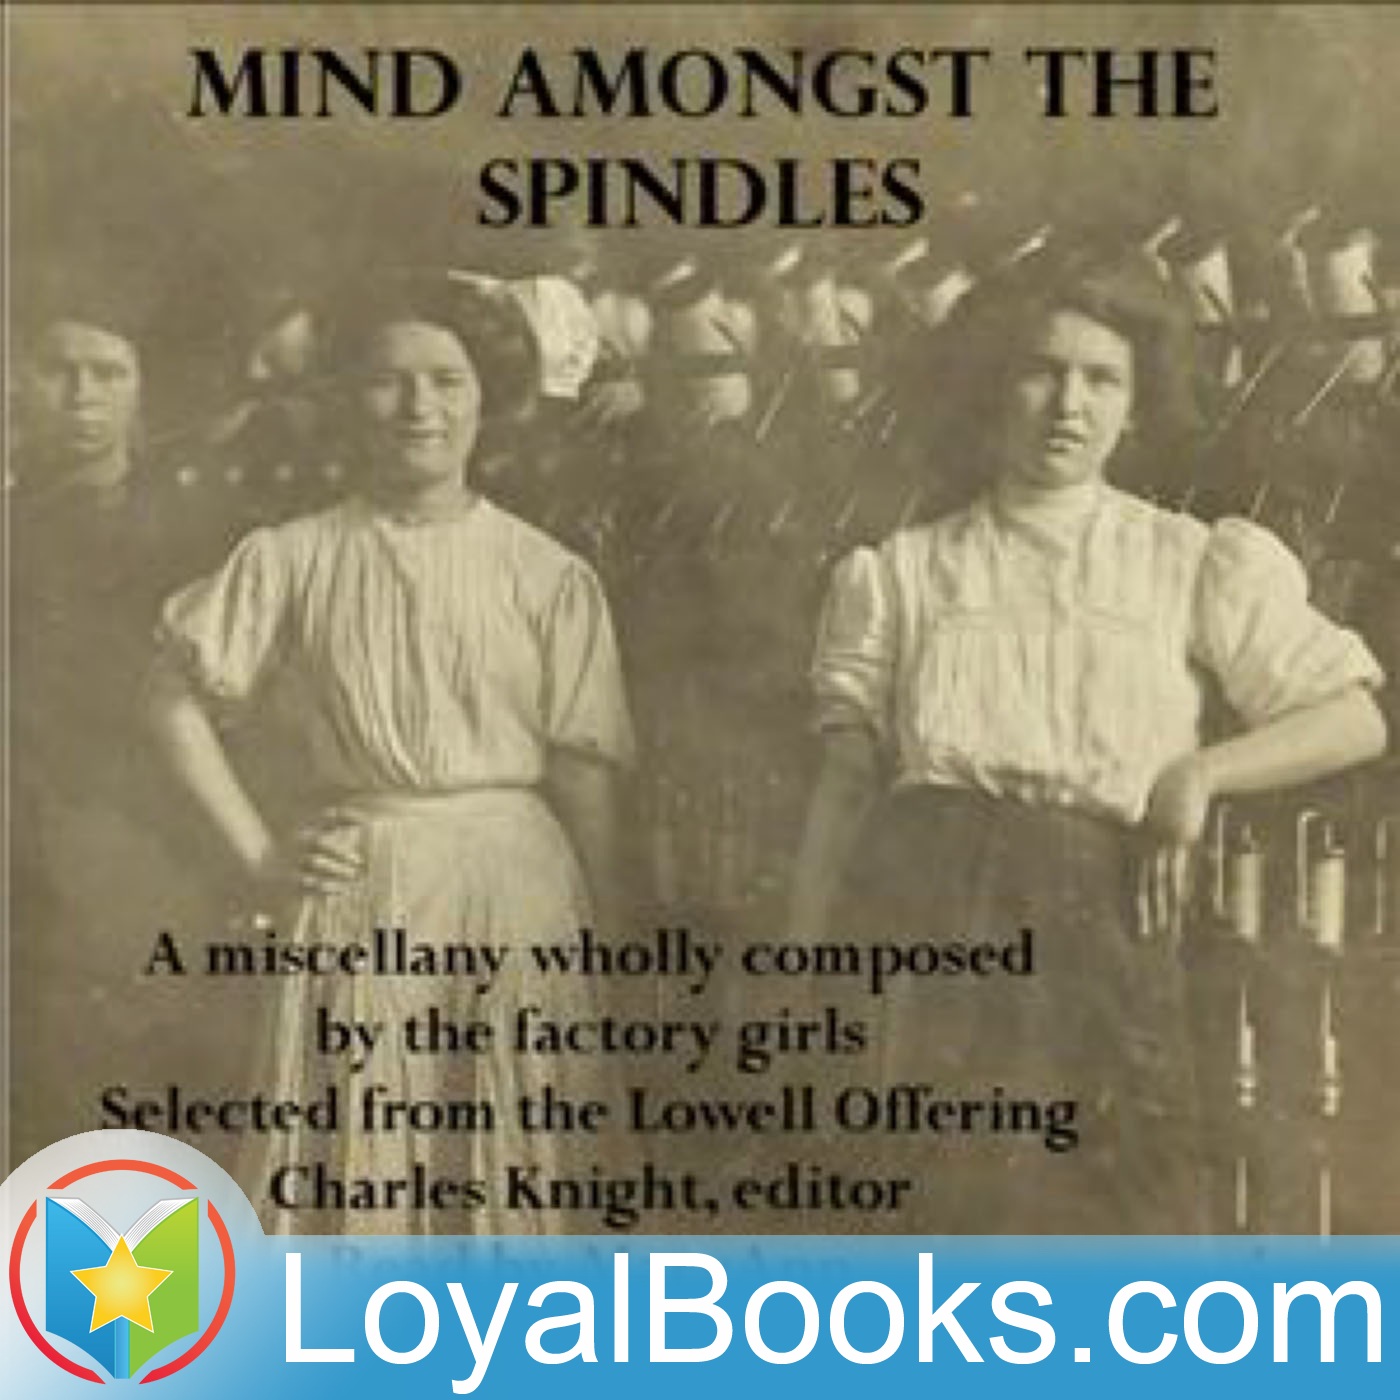 Mind Amongst the Spindles by Charles Knight